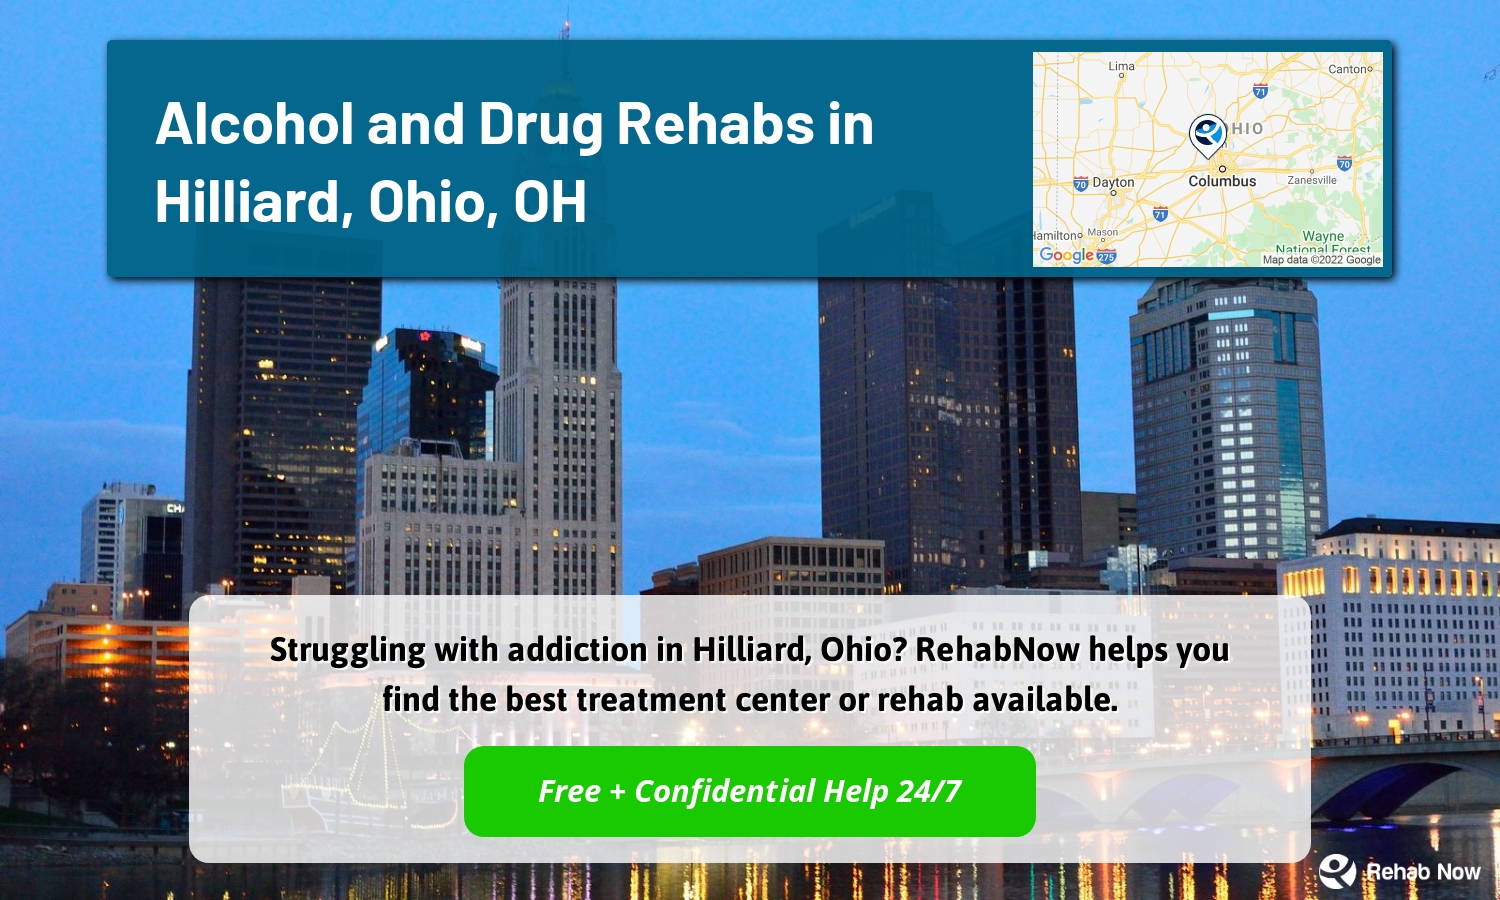 Struggling with addiction in Hilliard, Ohio? RehabNow helps you find the best treatment center or rehab available.